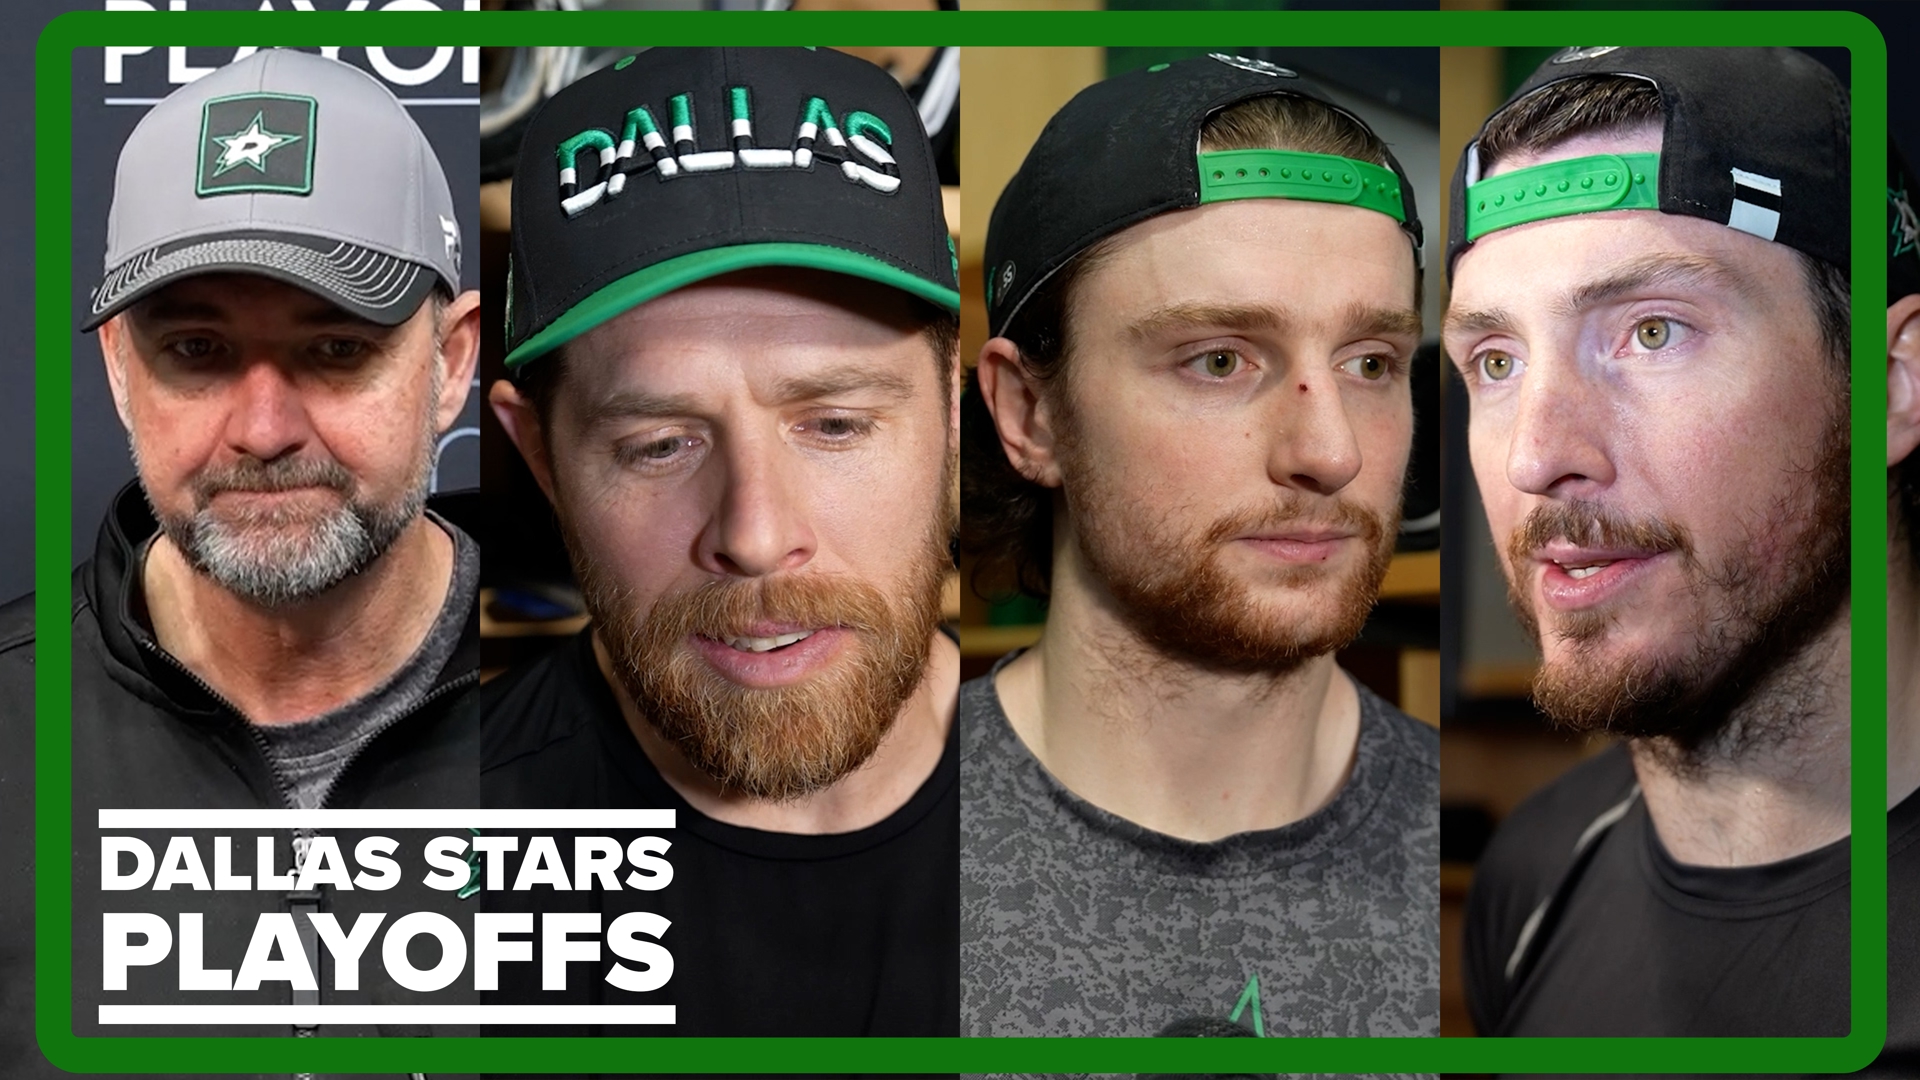 The Dallas Stars met with the media following their Monday practice ahead of this week's Western Conference Finals.